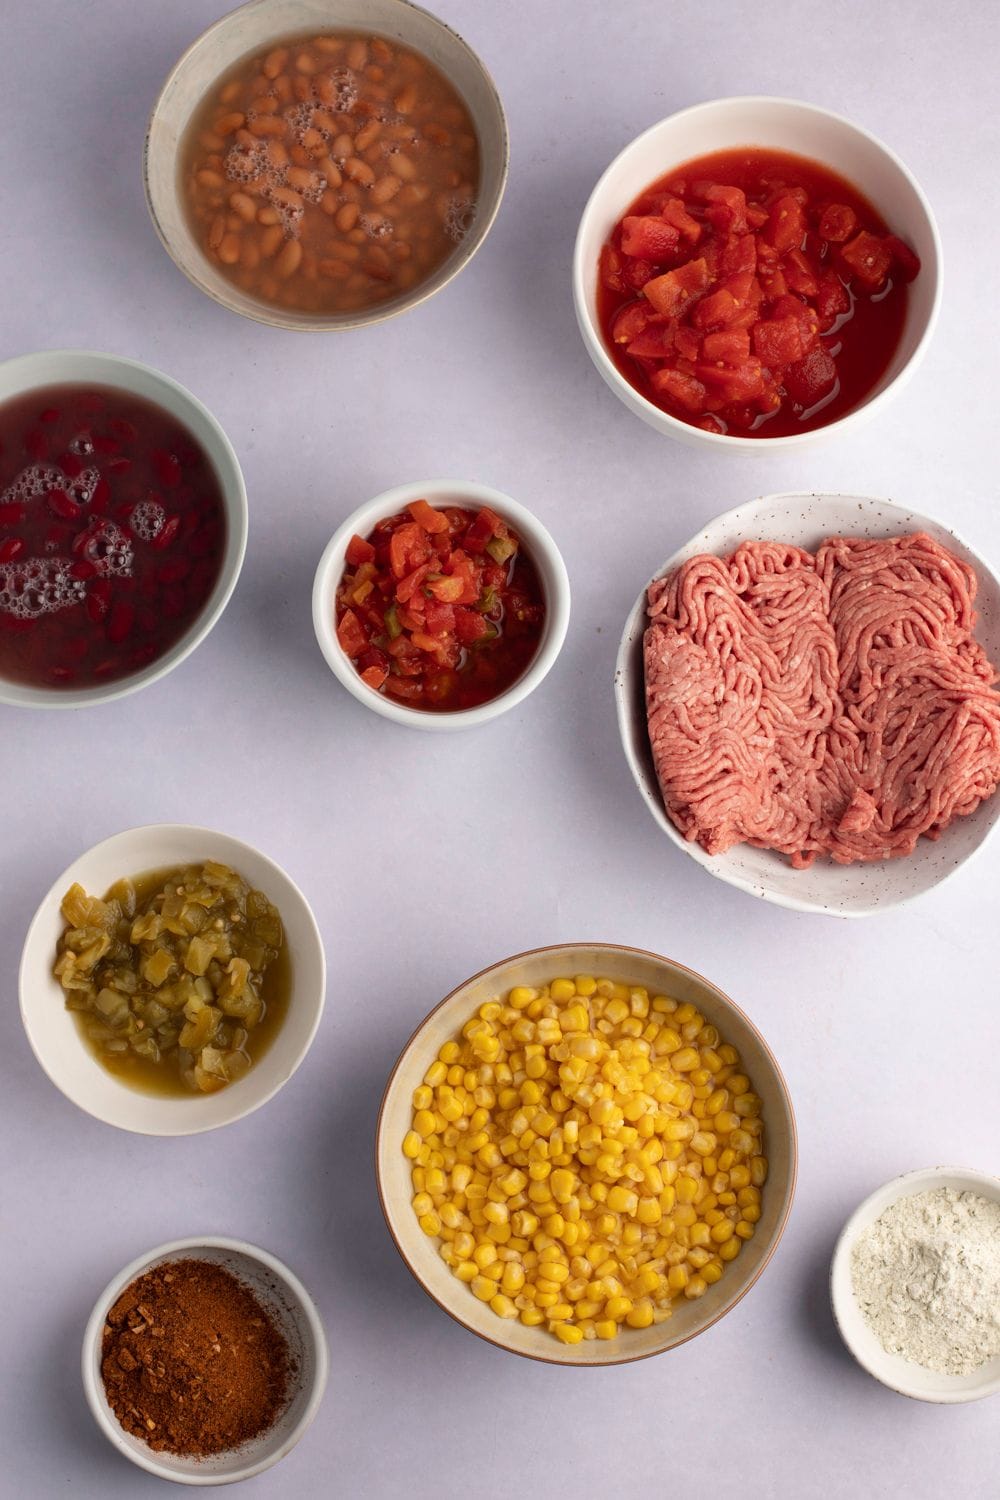 Taco Soup Ingredients - Beans, Canned Corn, Canned Tomatoes and Chilies, Taco Seasoning, Ranch Dressing, and Ground Beef